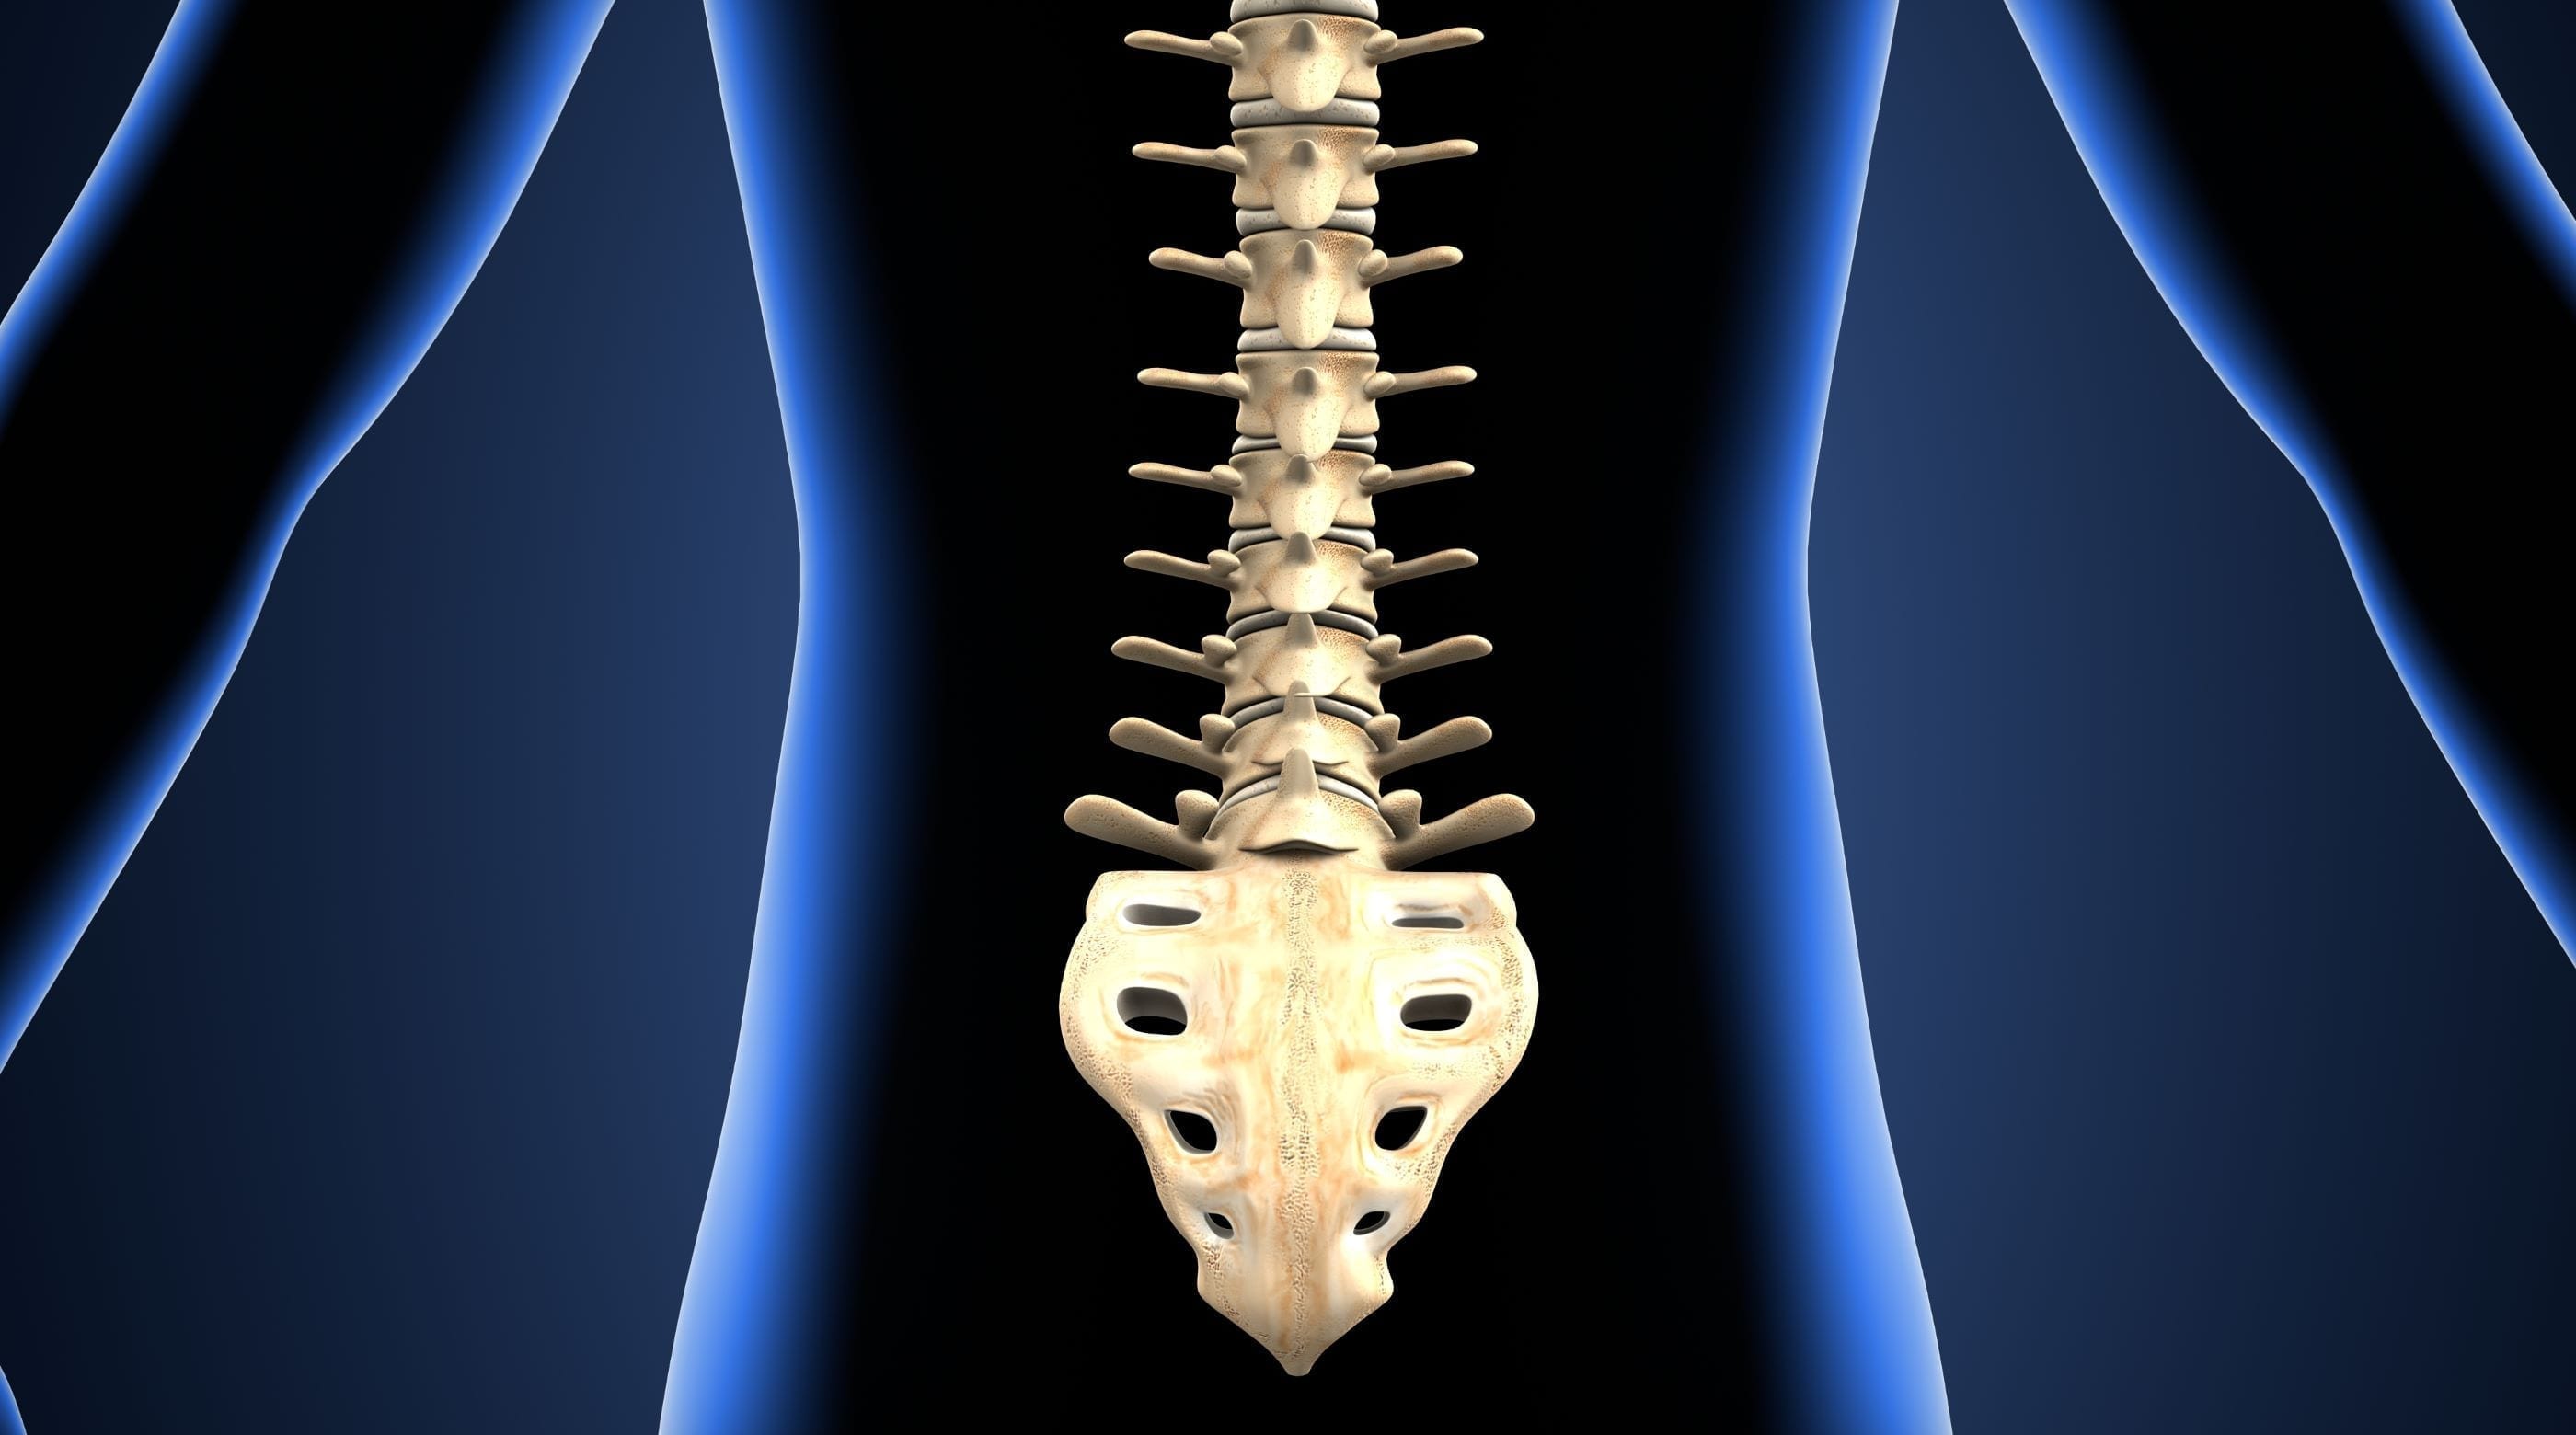 Structural Rehabilitation of the Lumbar Spine (Module 5)